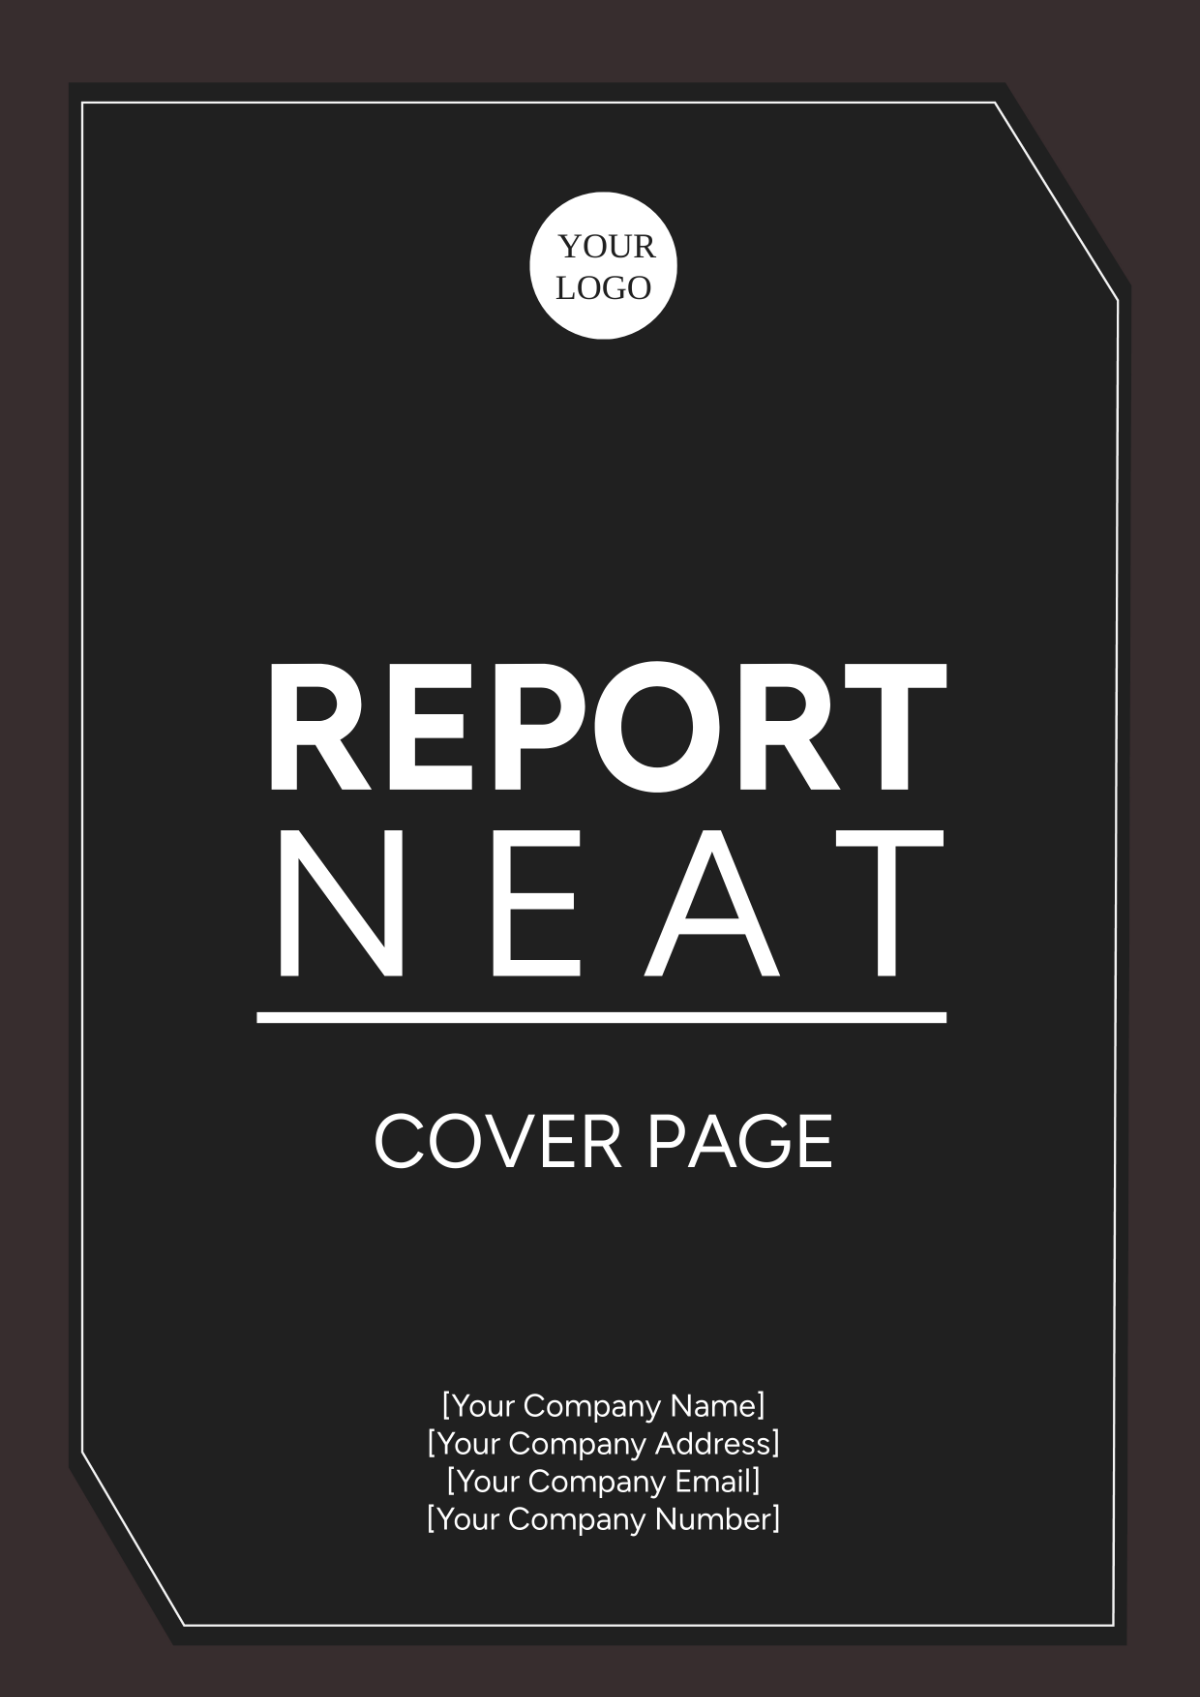 Report Neat Cover Page